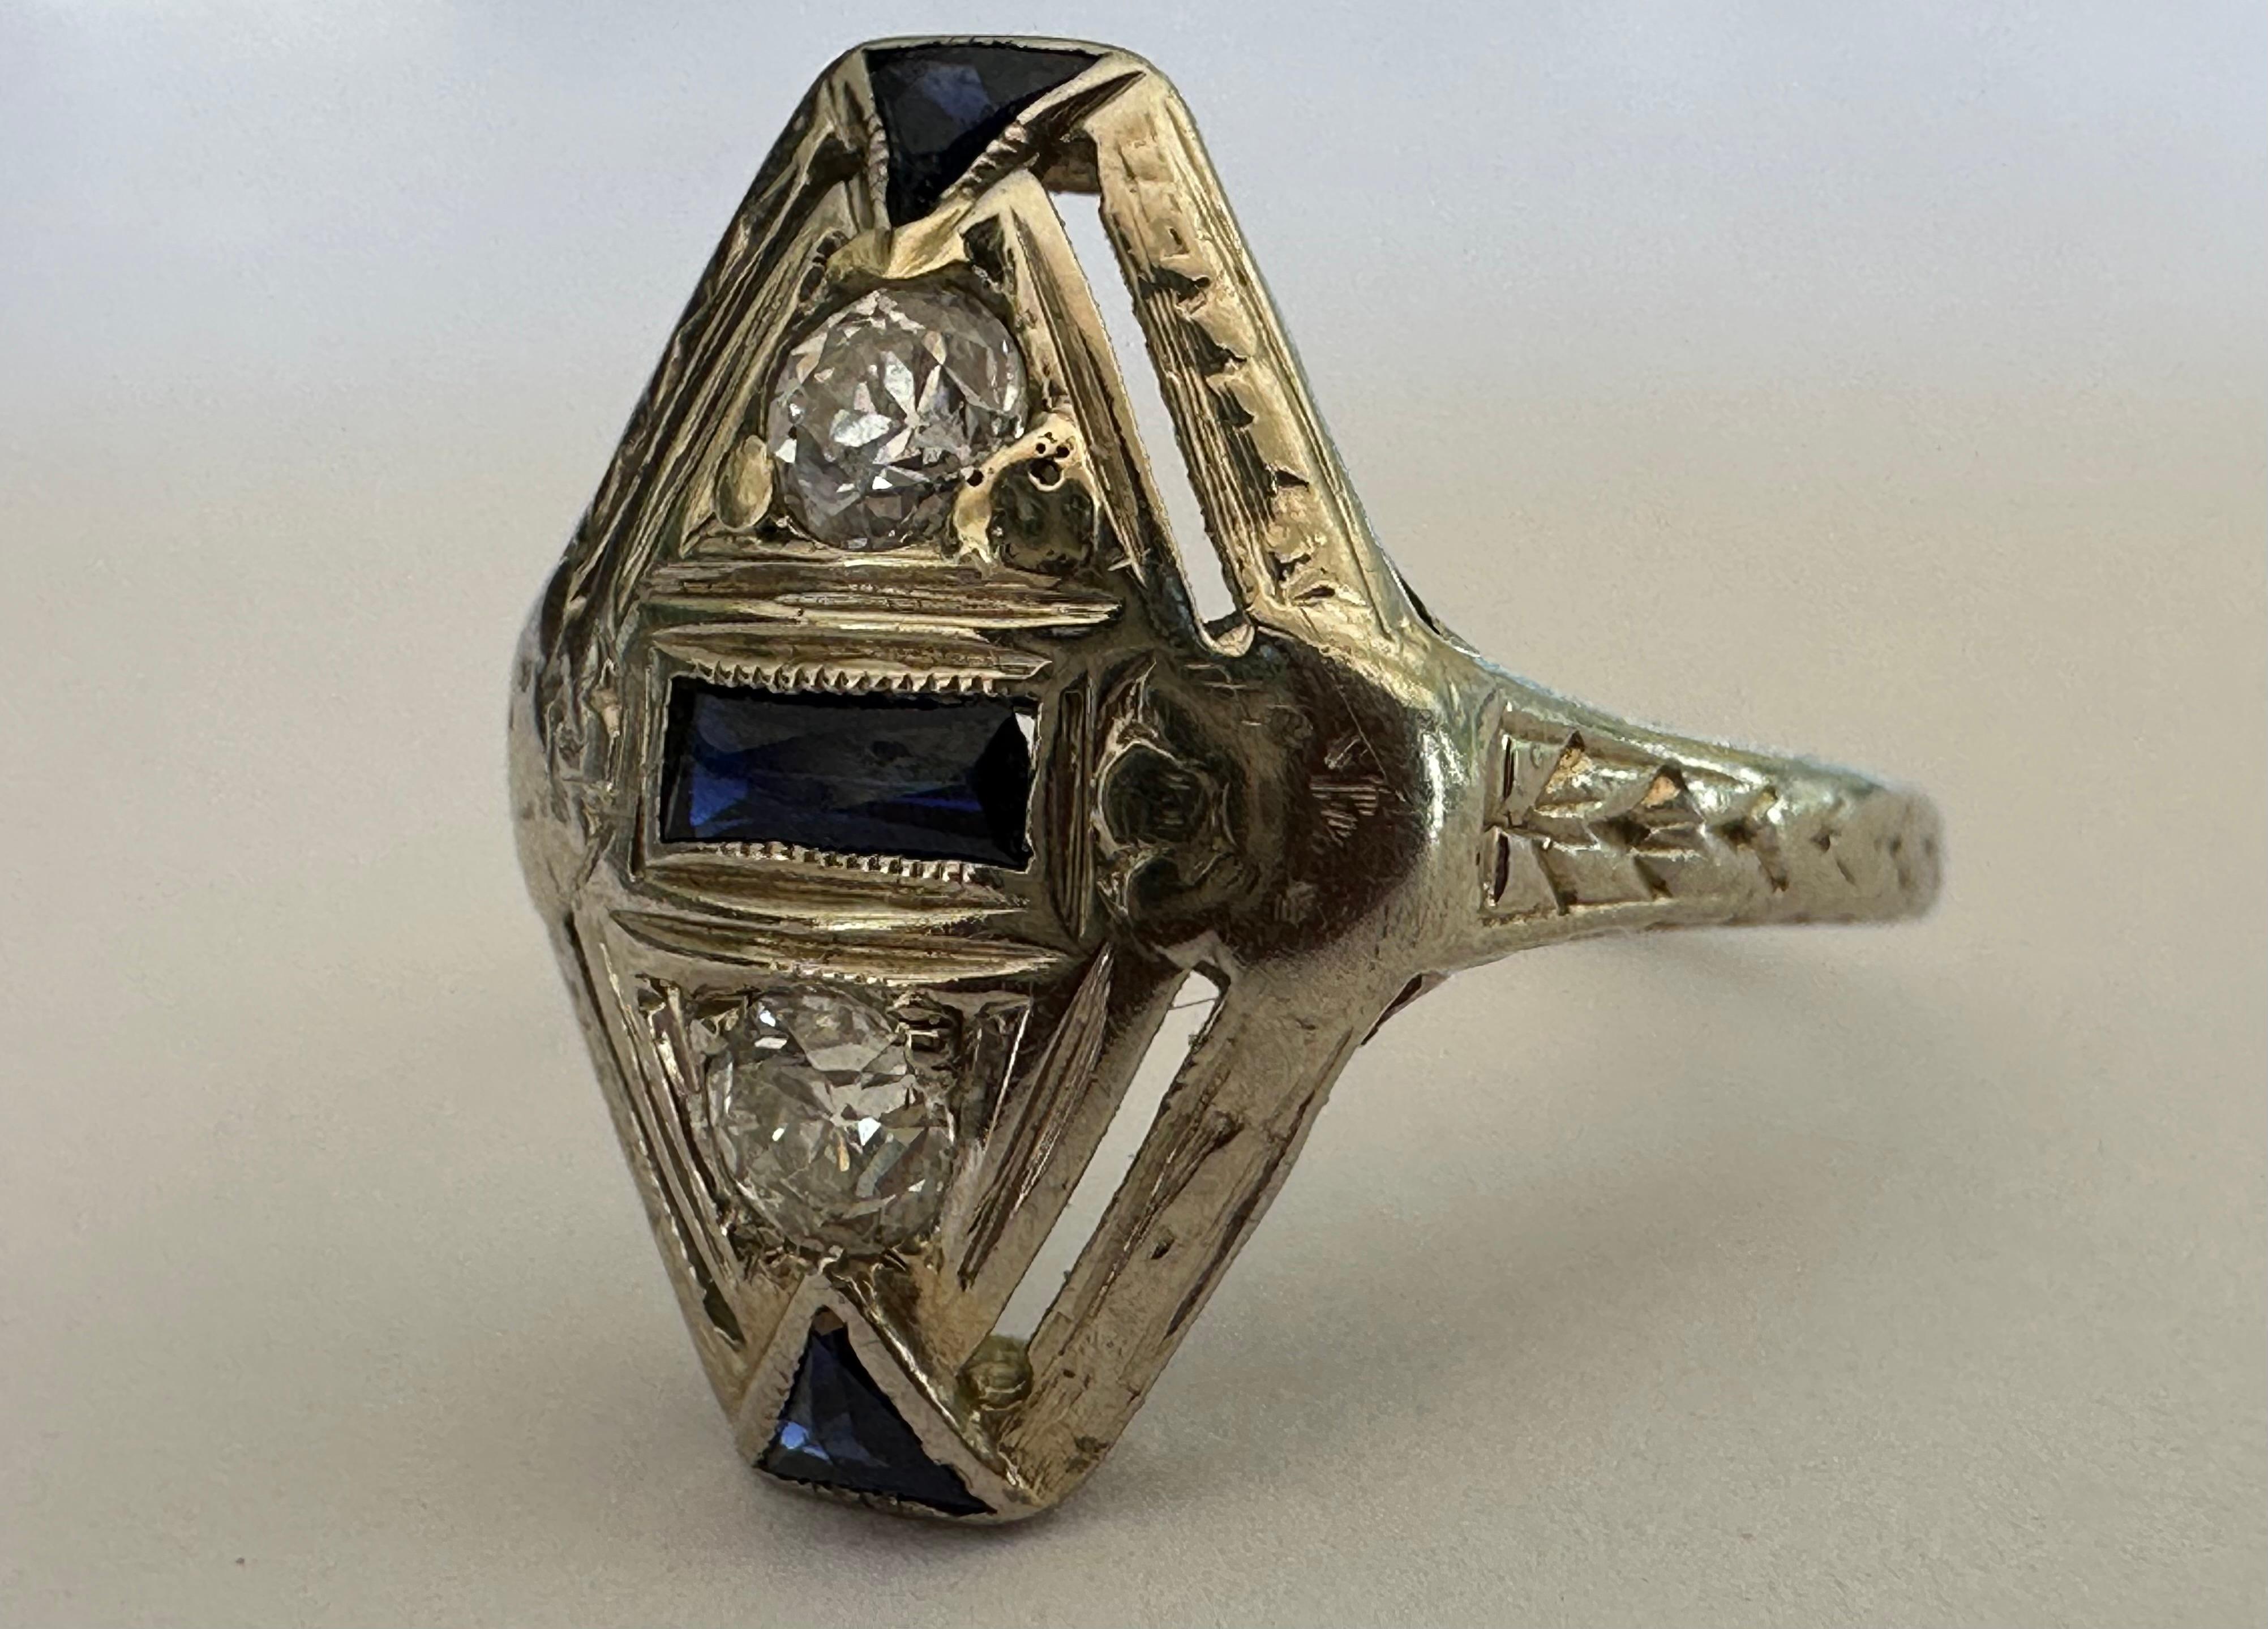 Two Old European cut diamonds totaling approximately 0.16 carat, HI color, VS clarity, shine within this navette-shaped pinky ring, complemented with deep blue sapphire accents and decorative piercing and hand engraving throughout.   Set in 18k